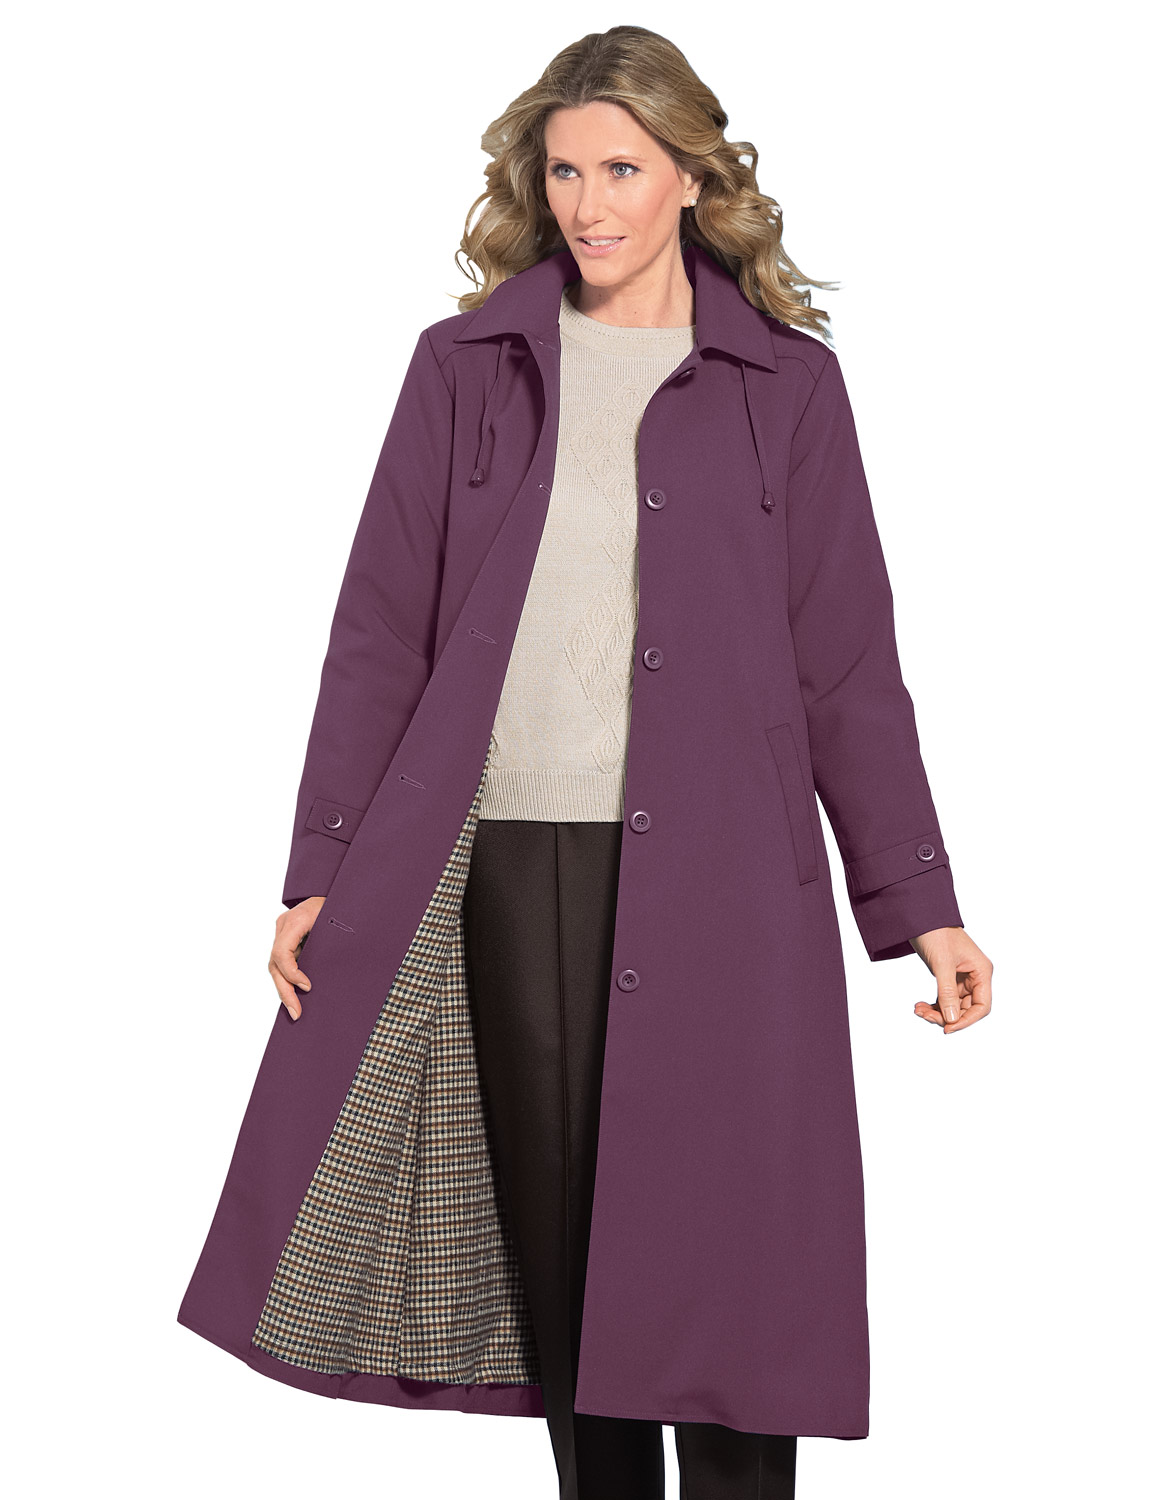 Ladies Traditional Shower Coat 42 Inches | eBay